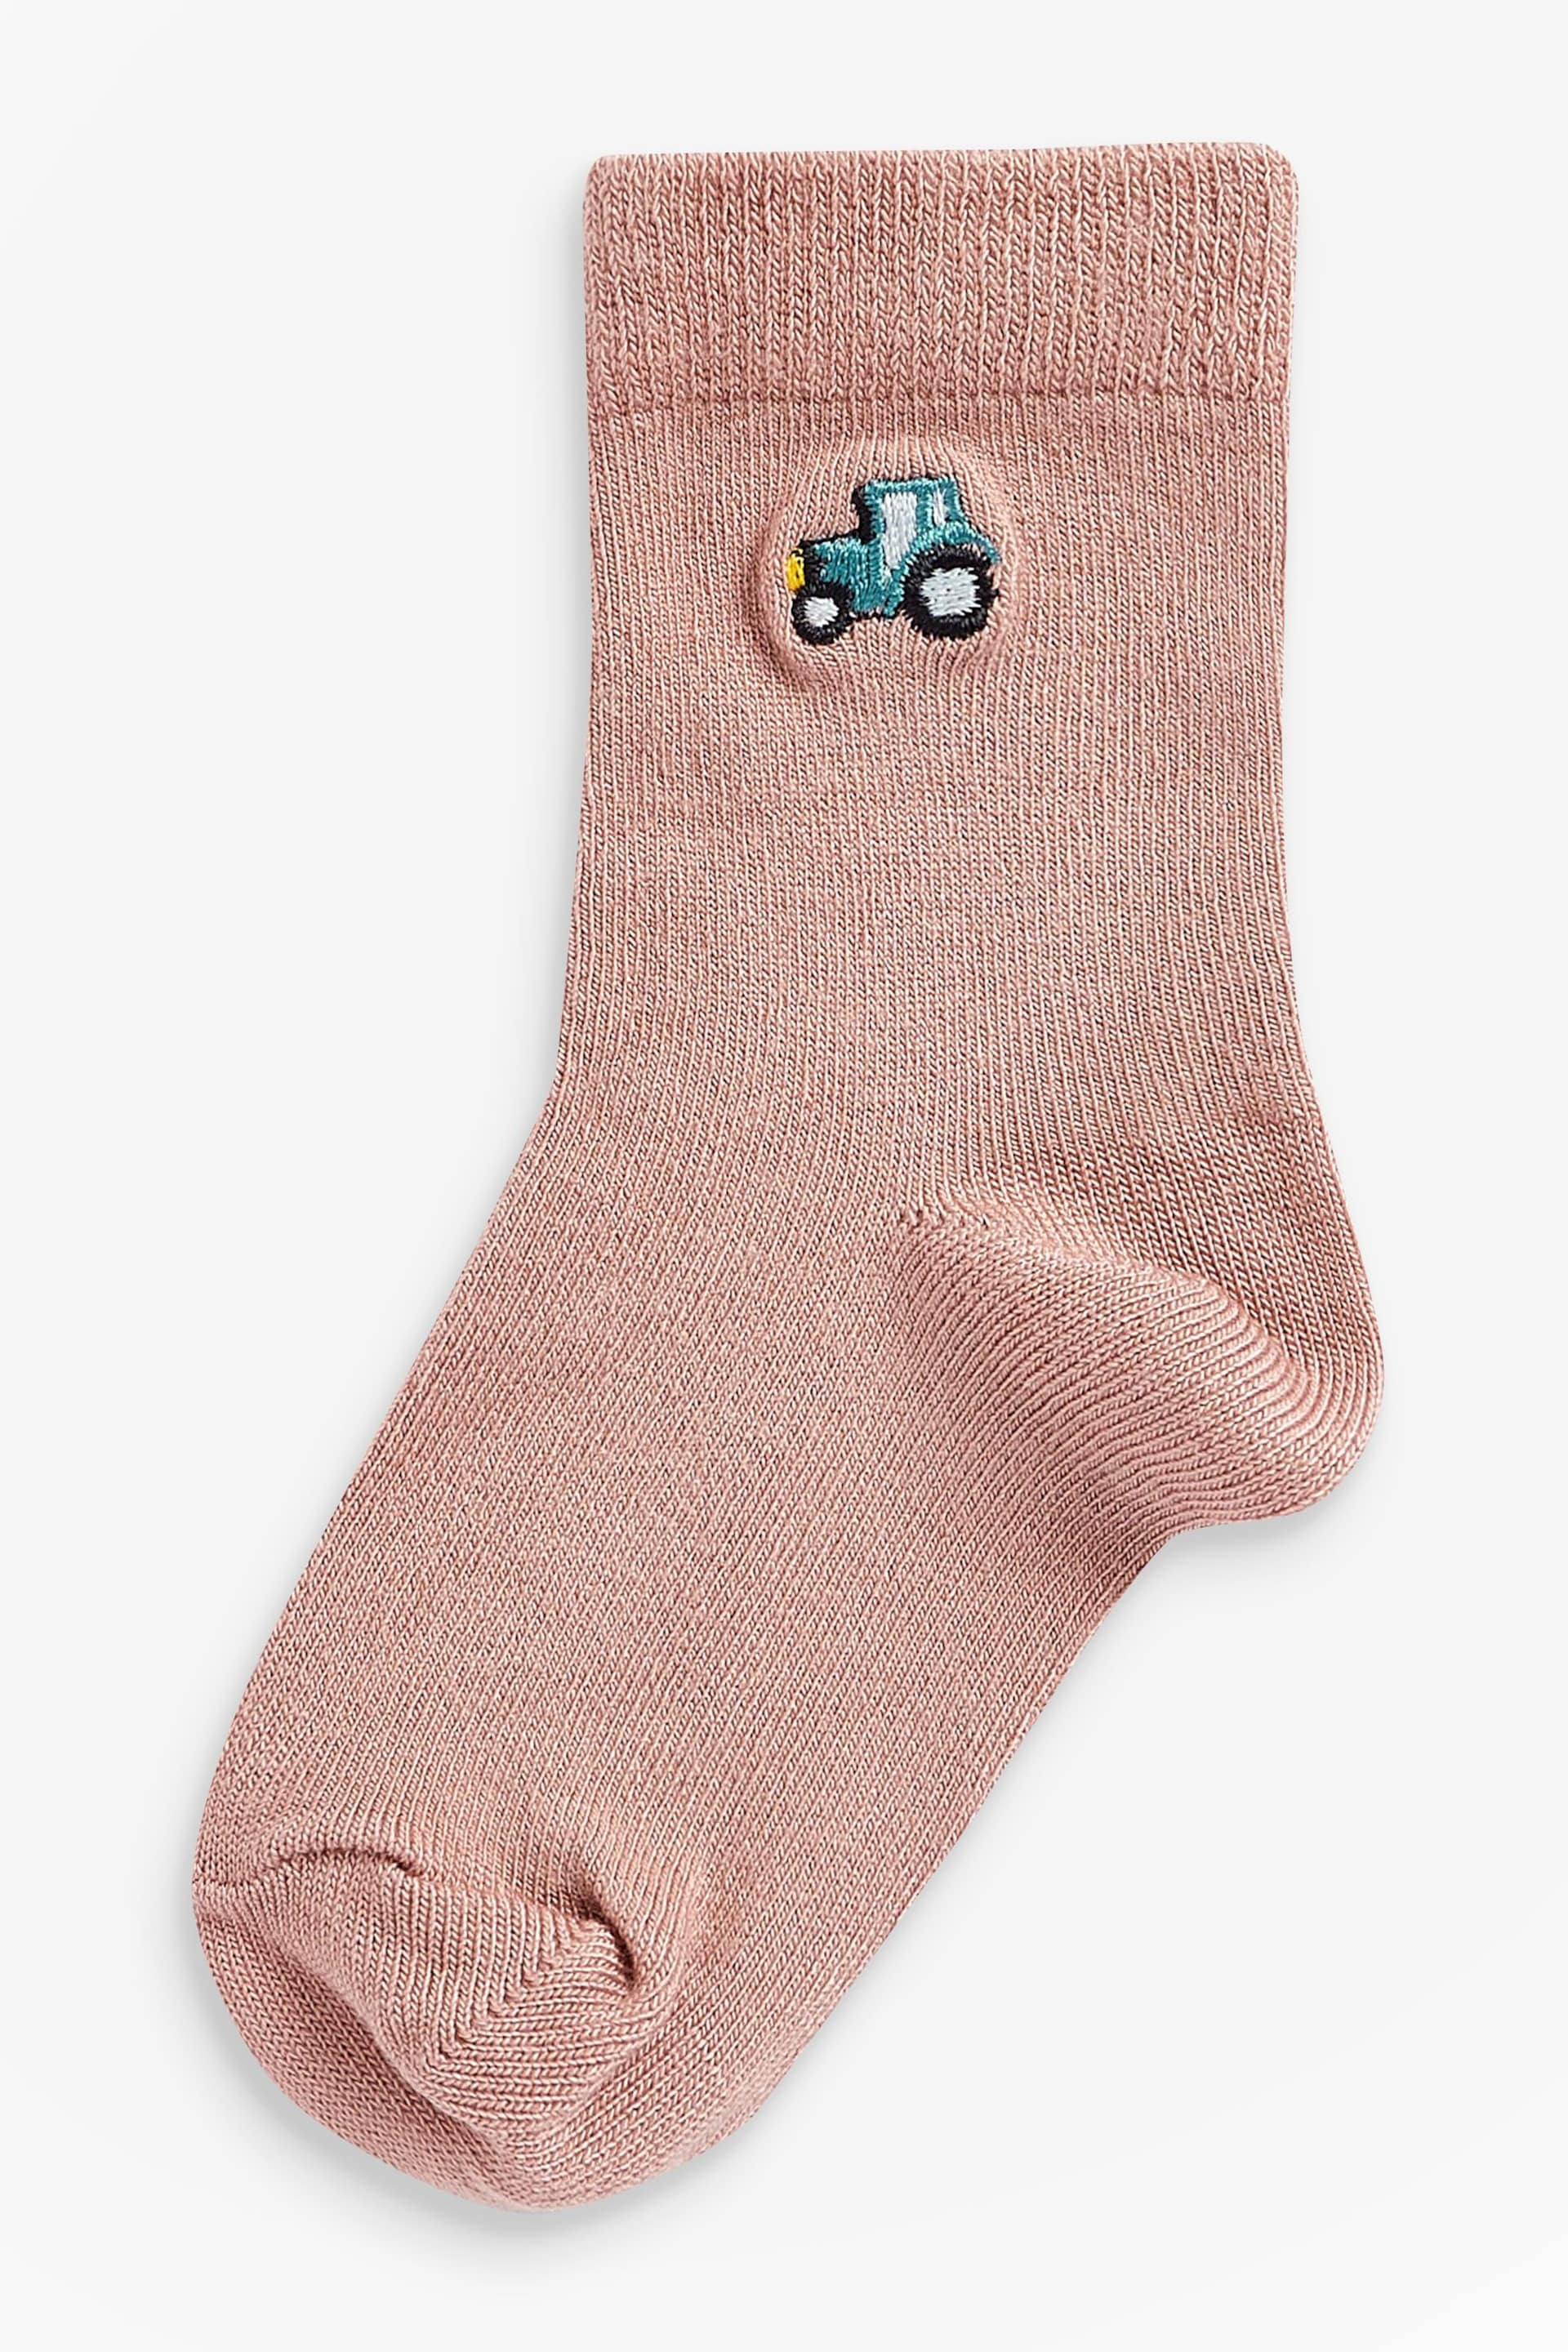 Mineral Character Cotton Rich Socks 7 Pack - Image 4 of 8